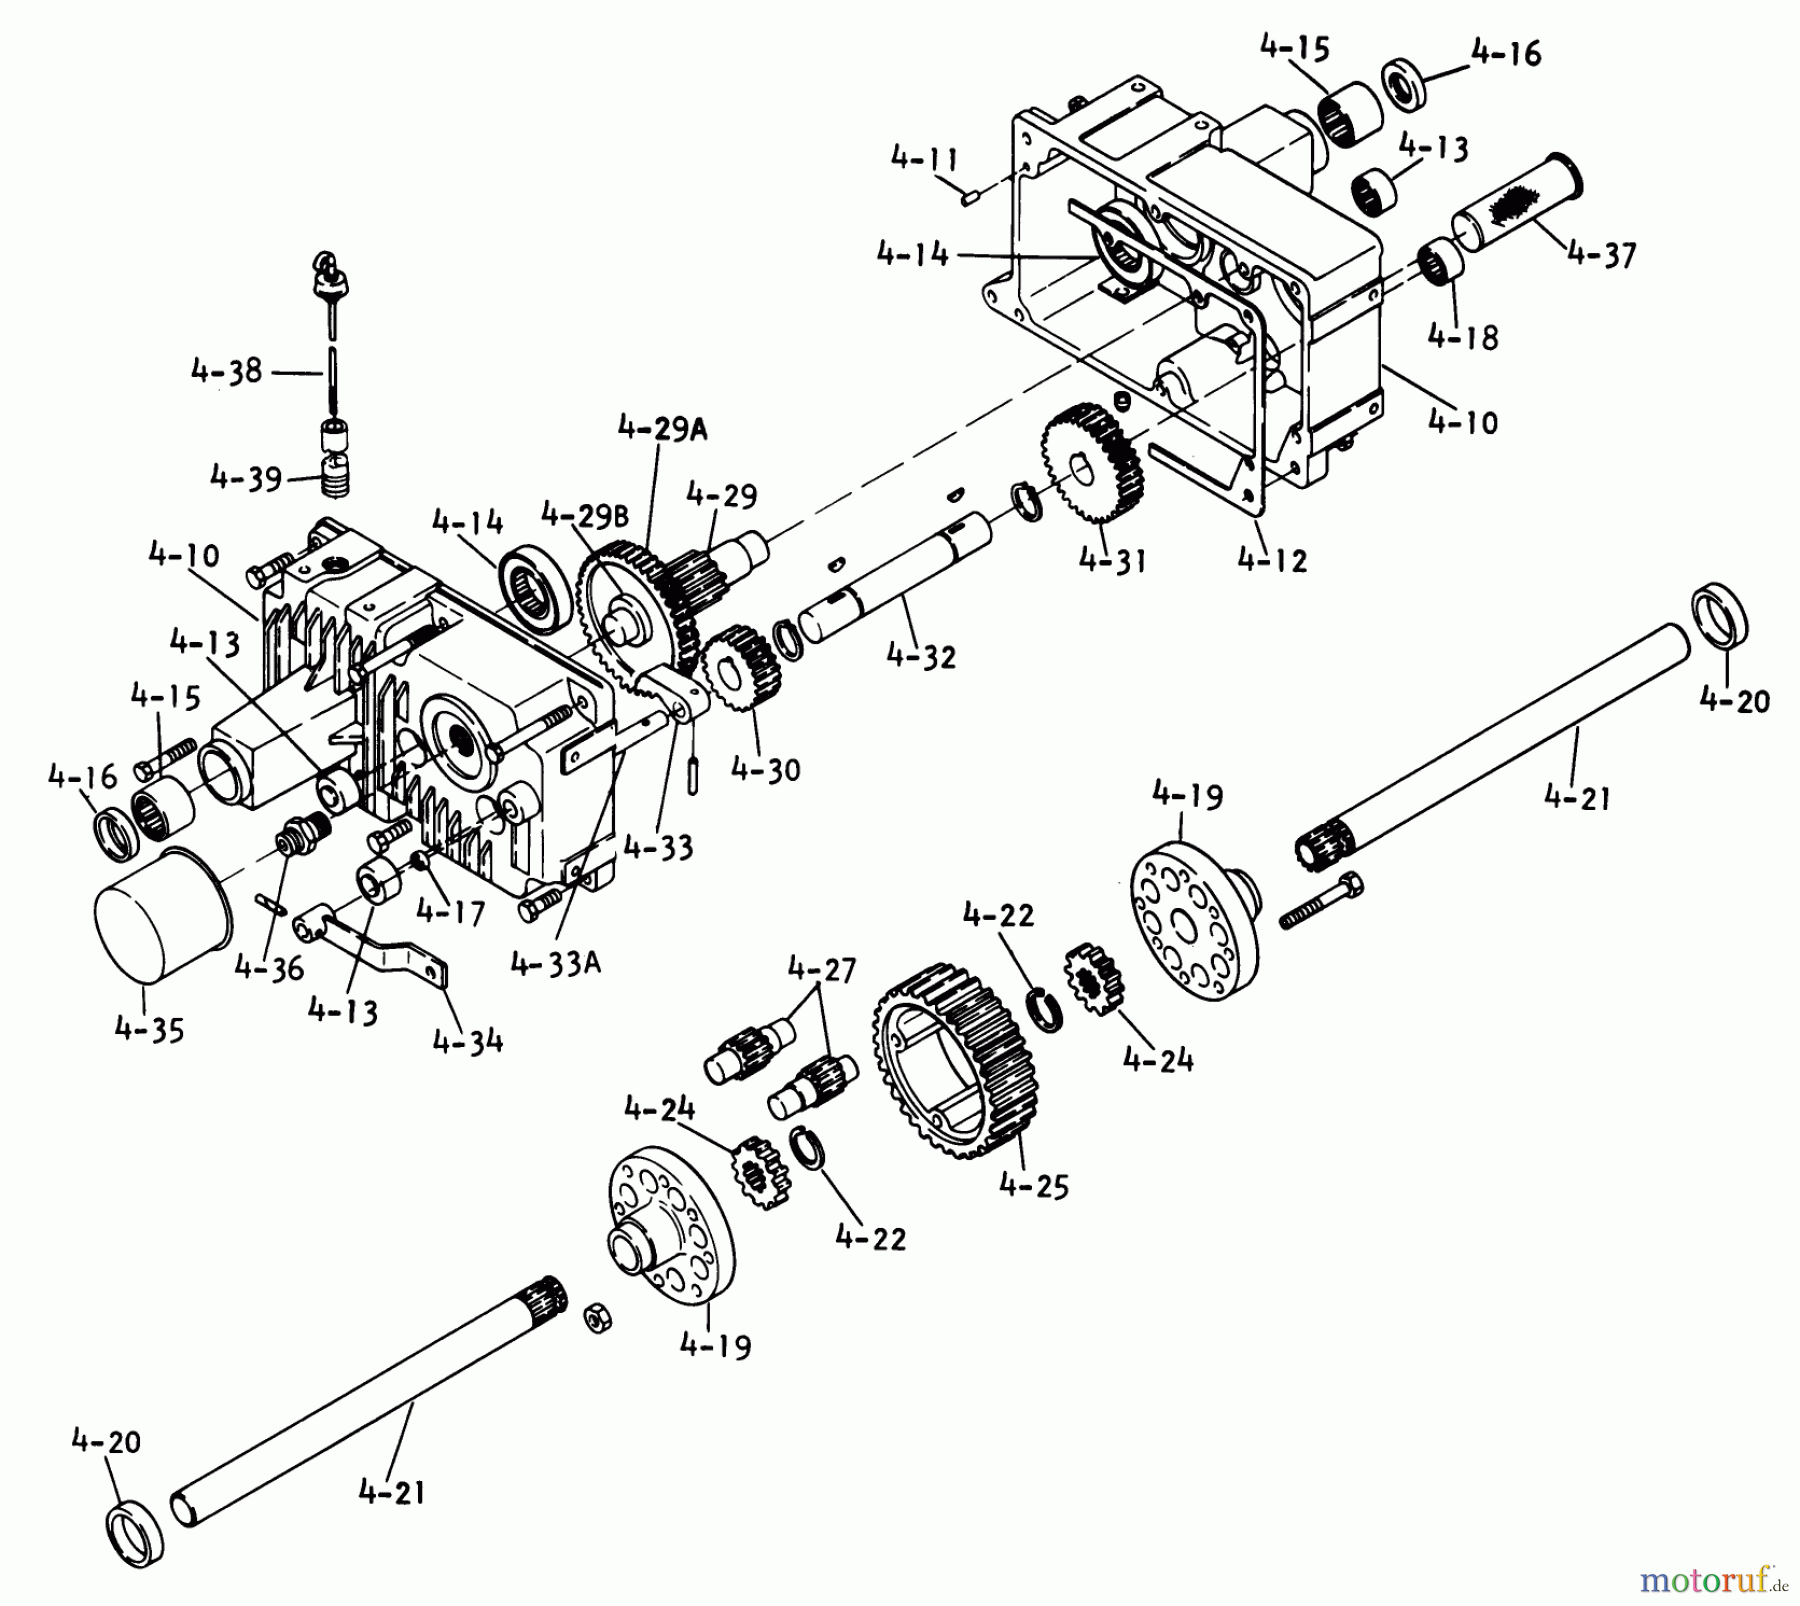  Toro Neu Mowers, Lawn & Garden Tractor Seite 1 1-0631 (D-200) - Toro D-200 Automatic Tractor, 1975 4.010 TRANSAXLE-COMPONENT PARTS (FIG. 4A)